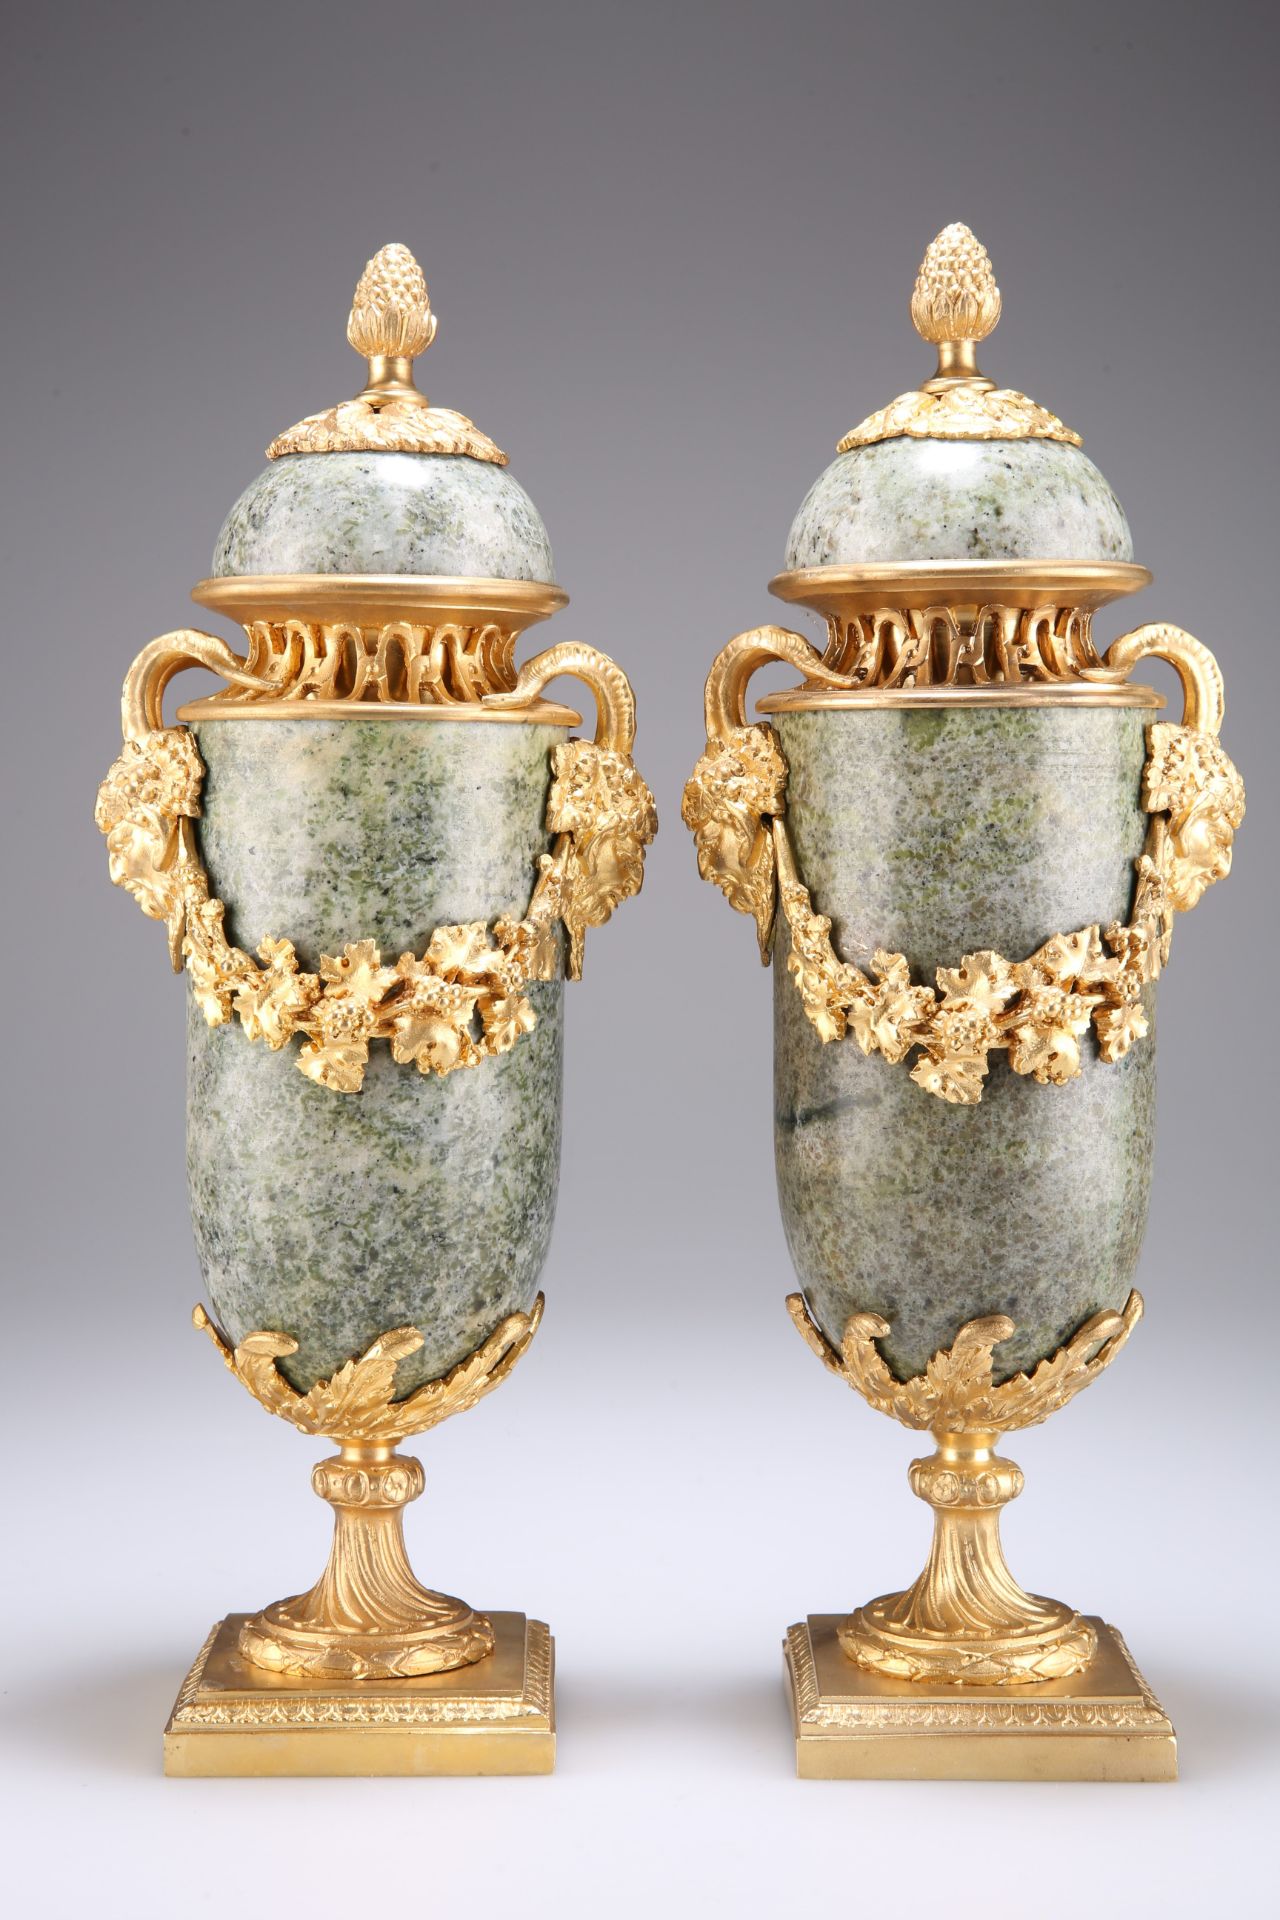 A PAIR OF CONTINENTAL GILT-METAL MOUNTED SERPENTIN